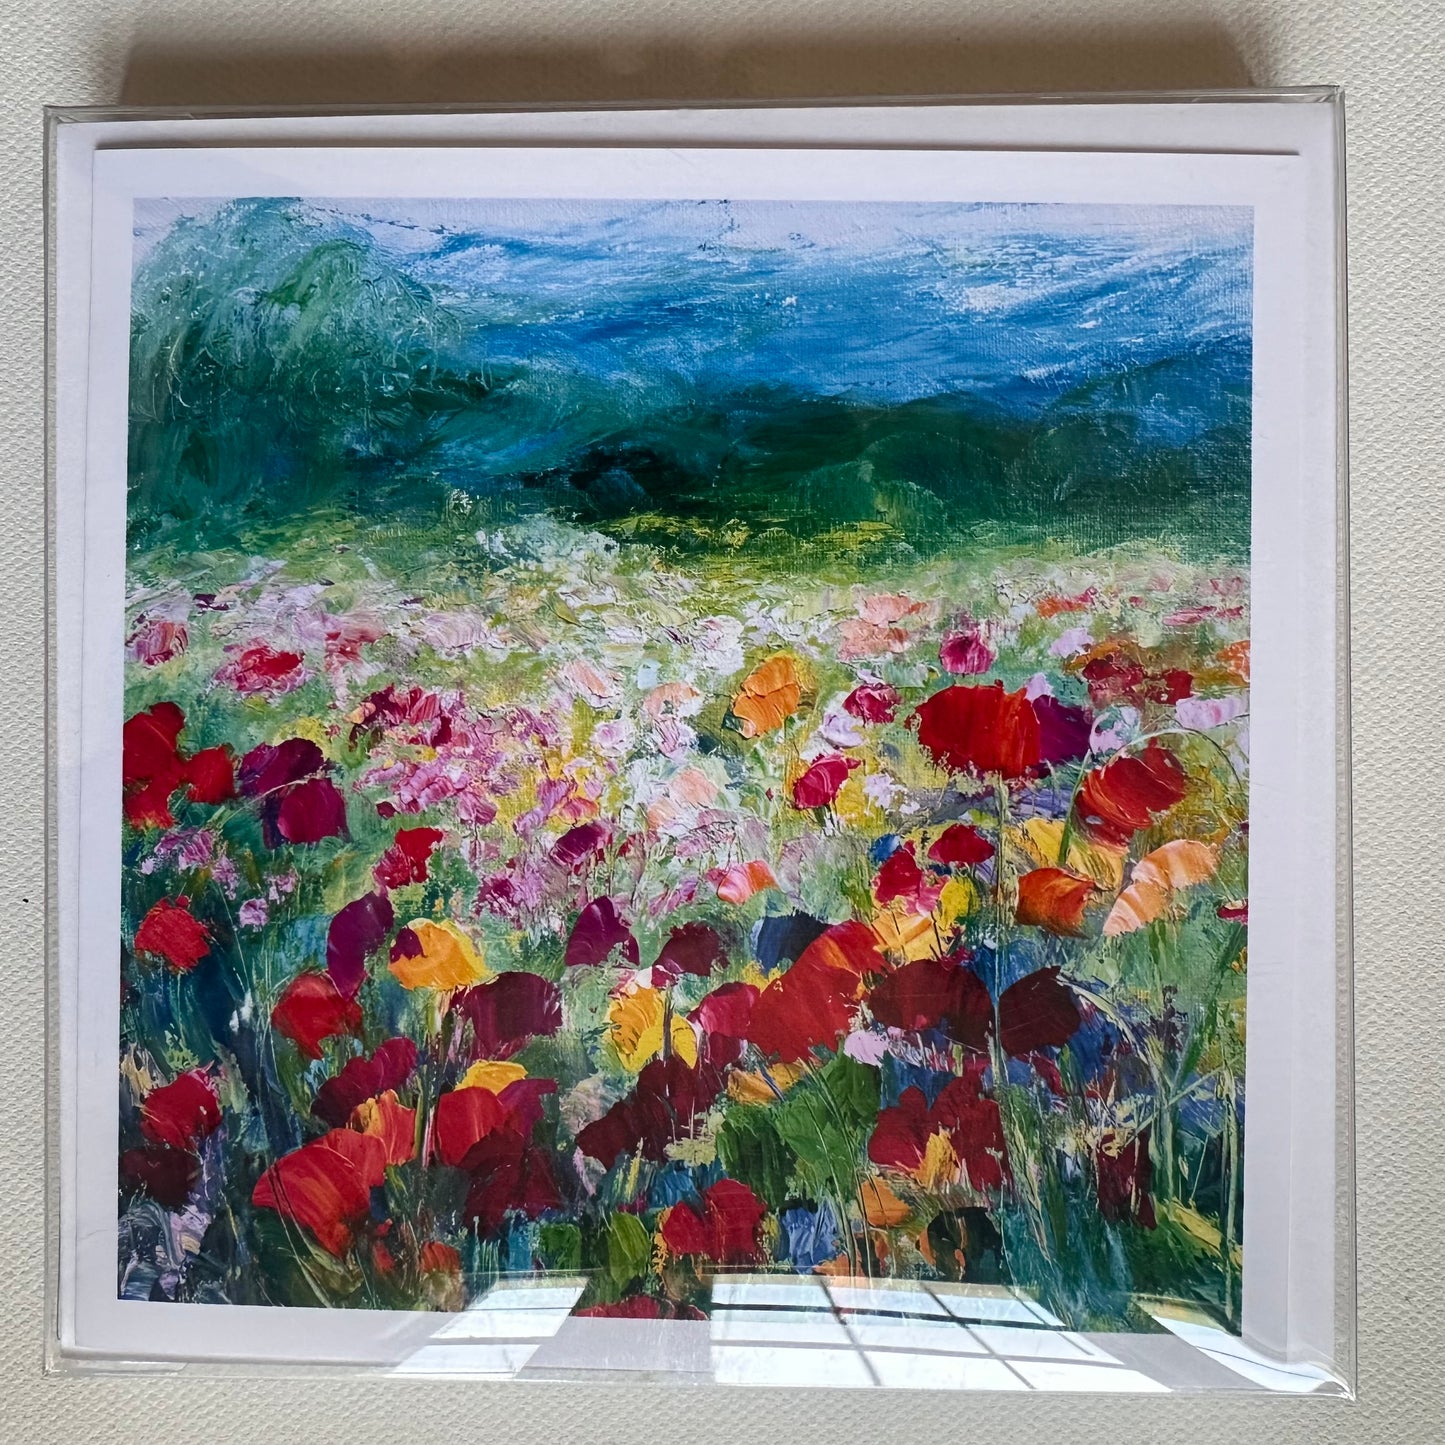 BOX SET 7: Seven Lively Poppies 5 x 5 Greeting Cards